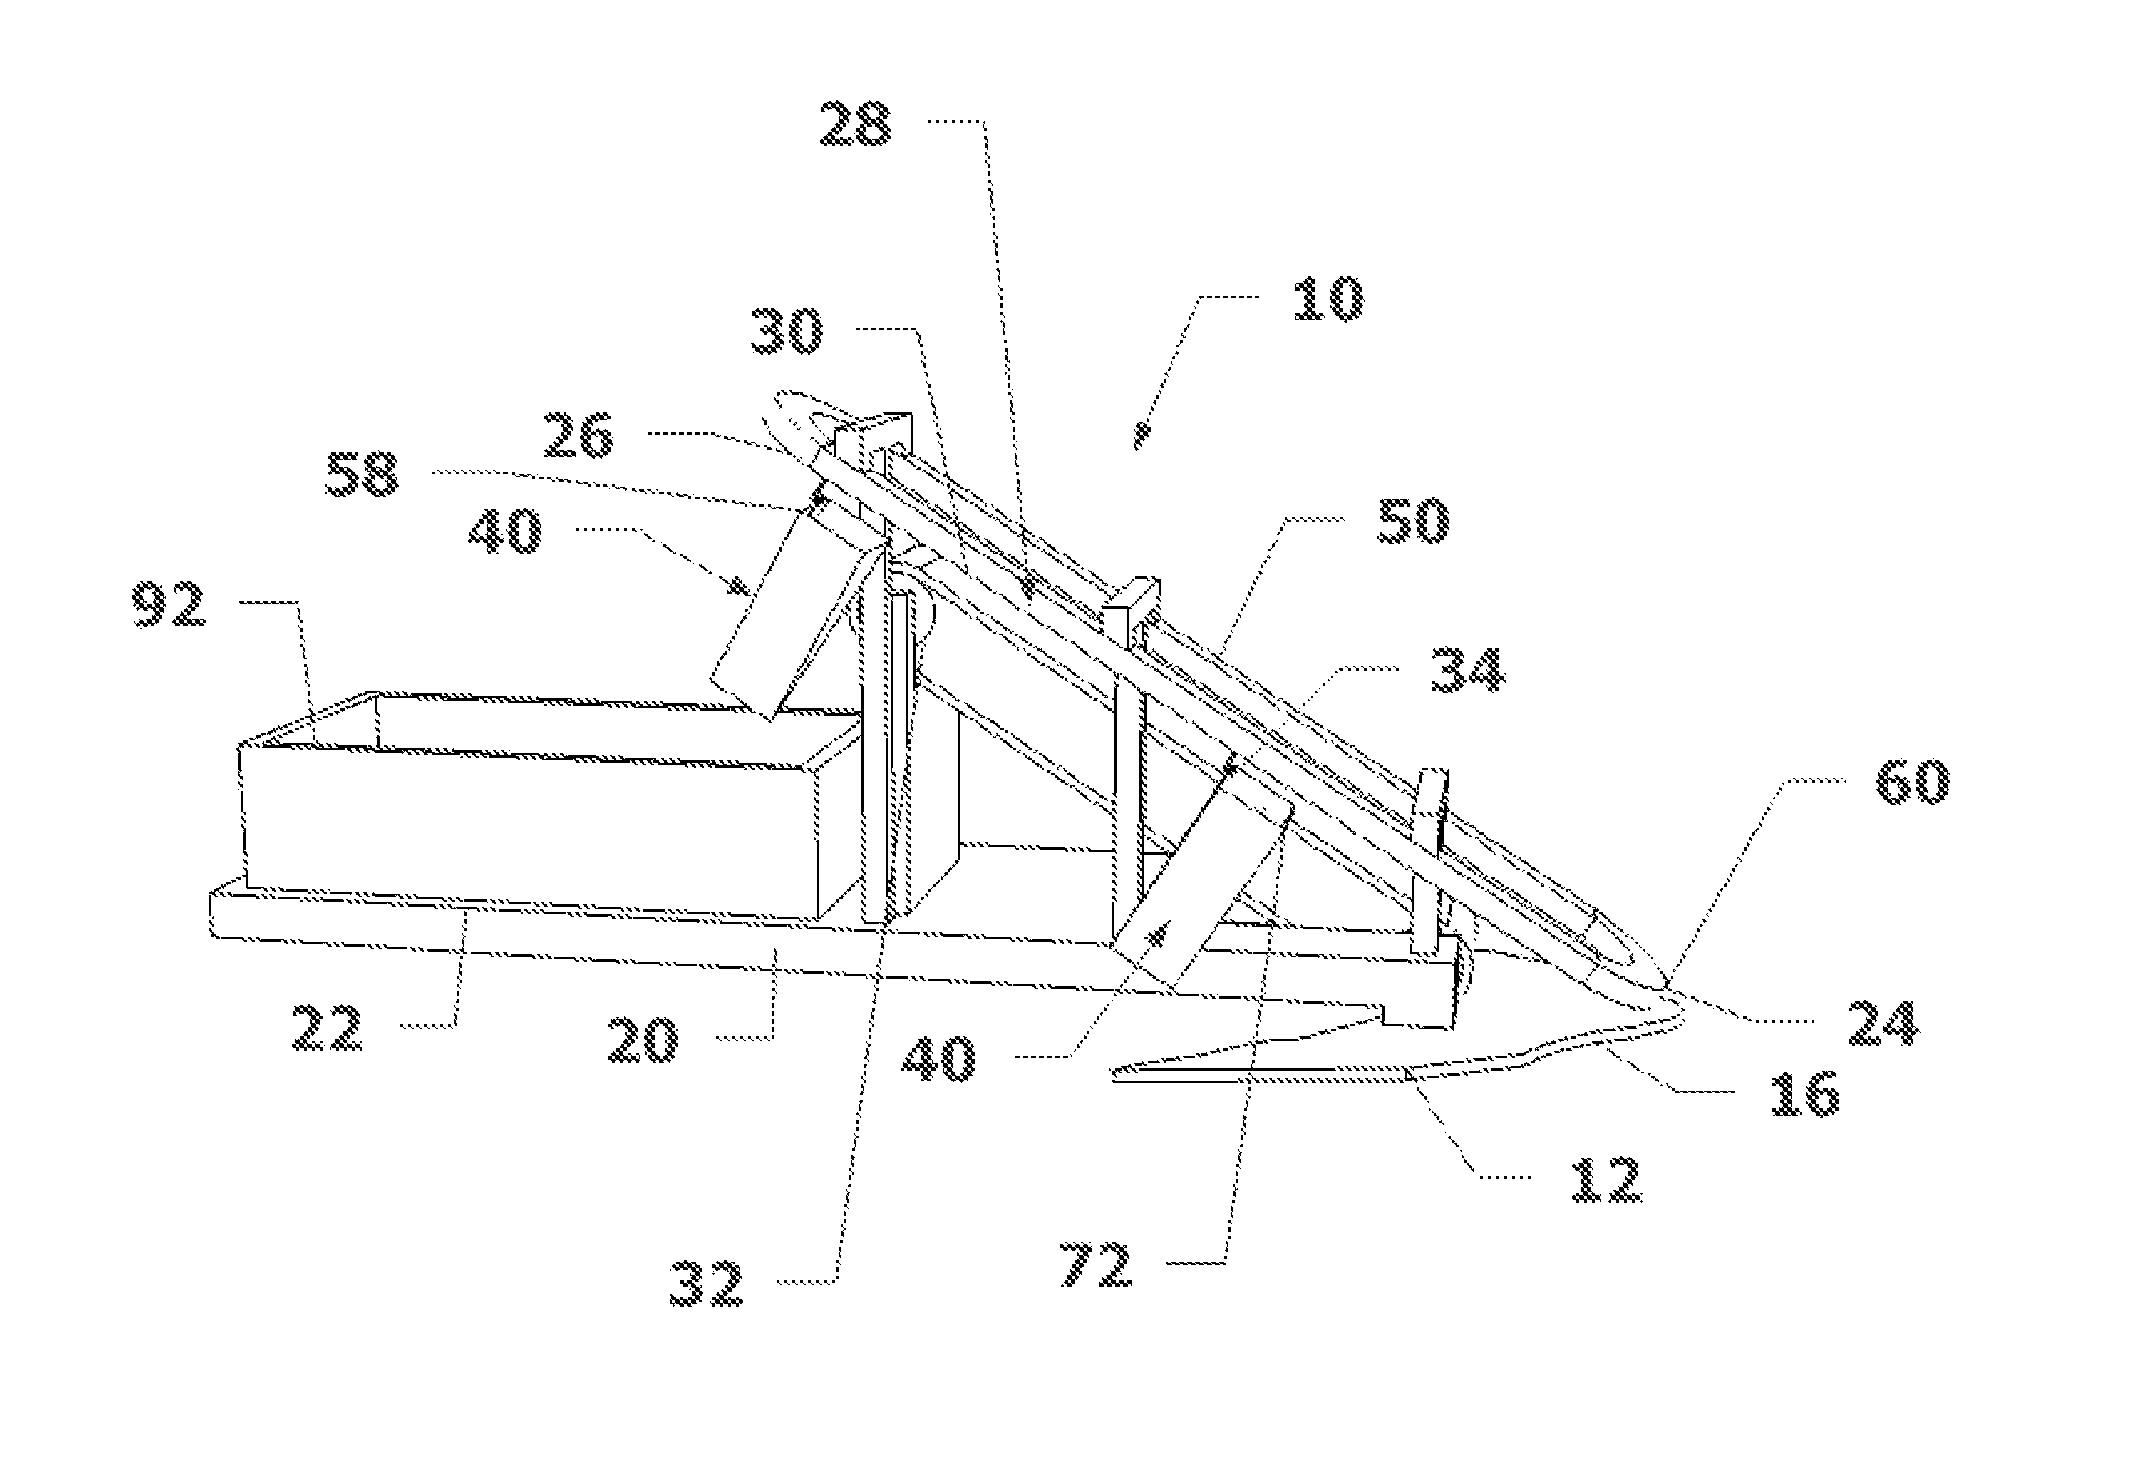 Apparatus for recovering oil from a body of water